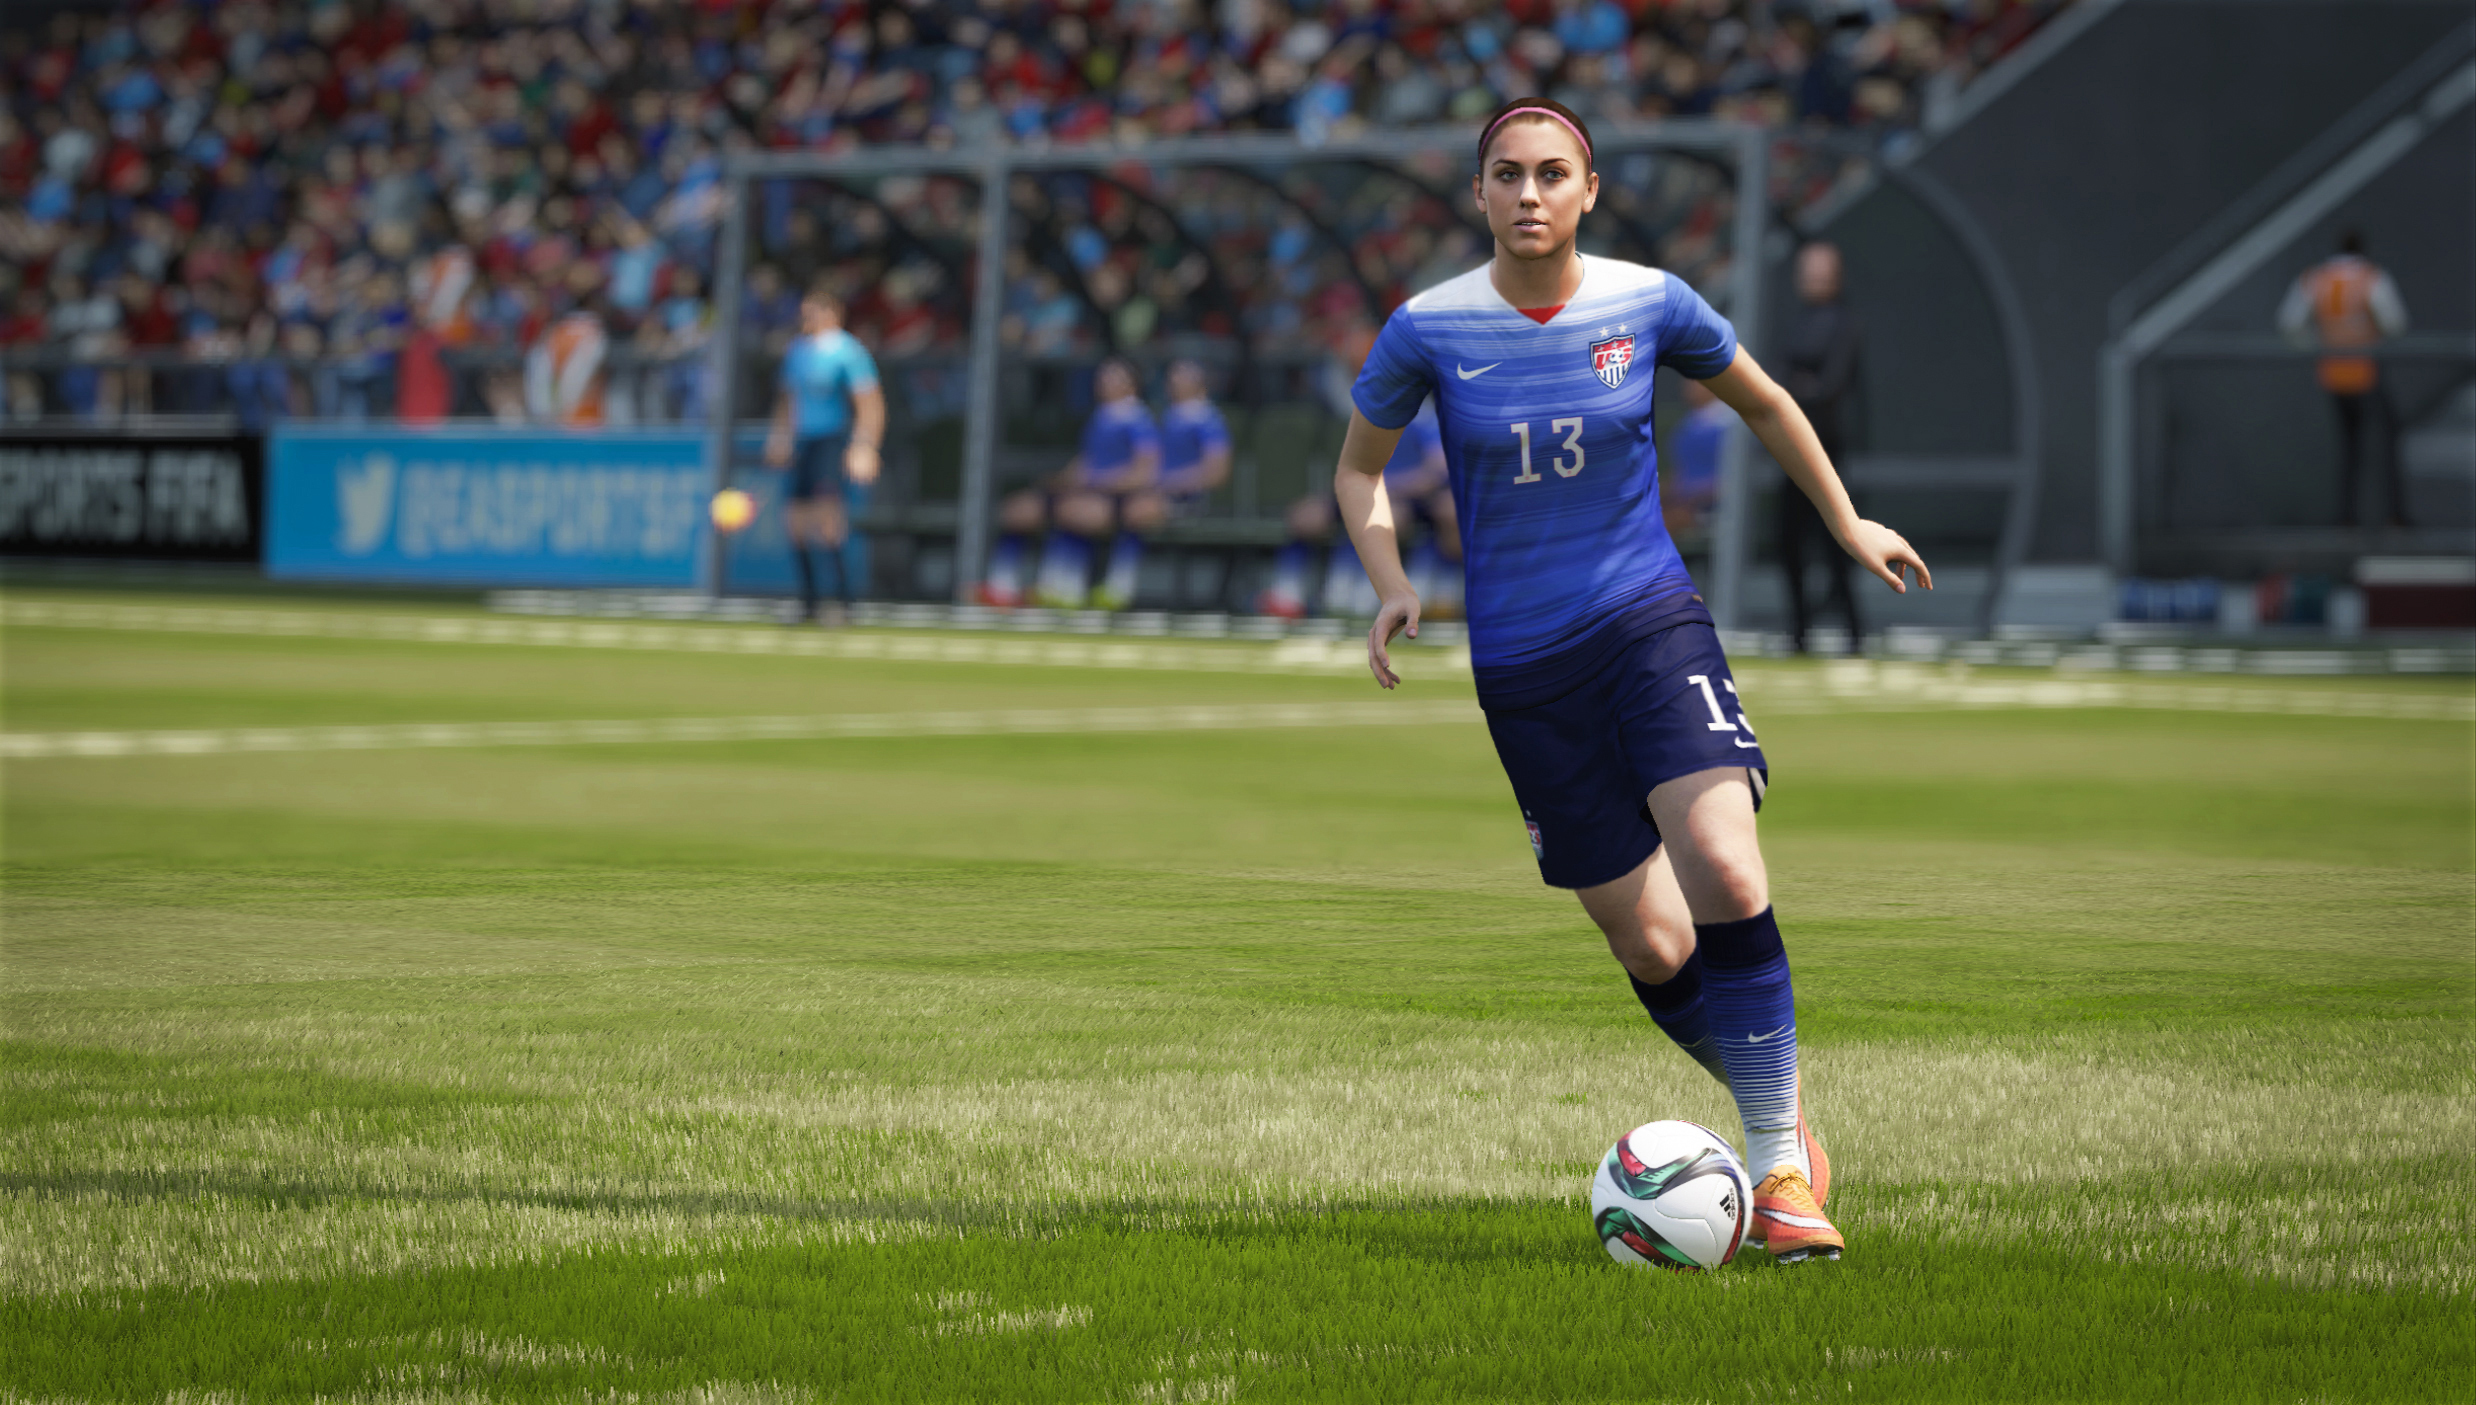 FIFA 16 to Feature Female Soccer Players for the First Time